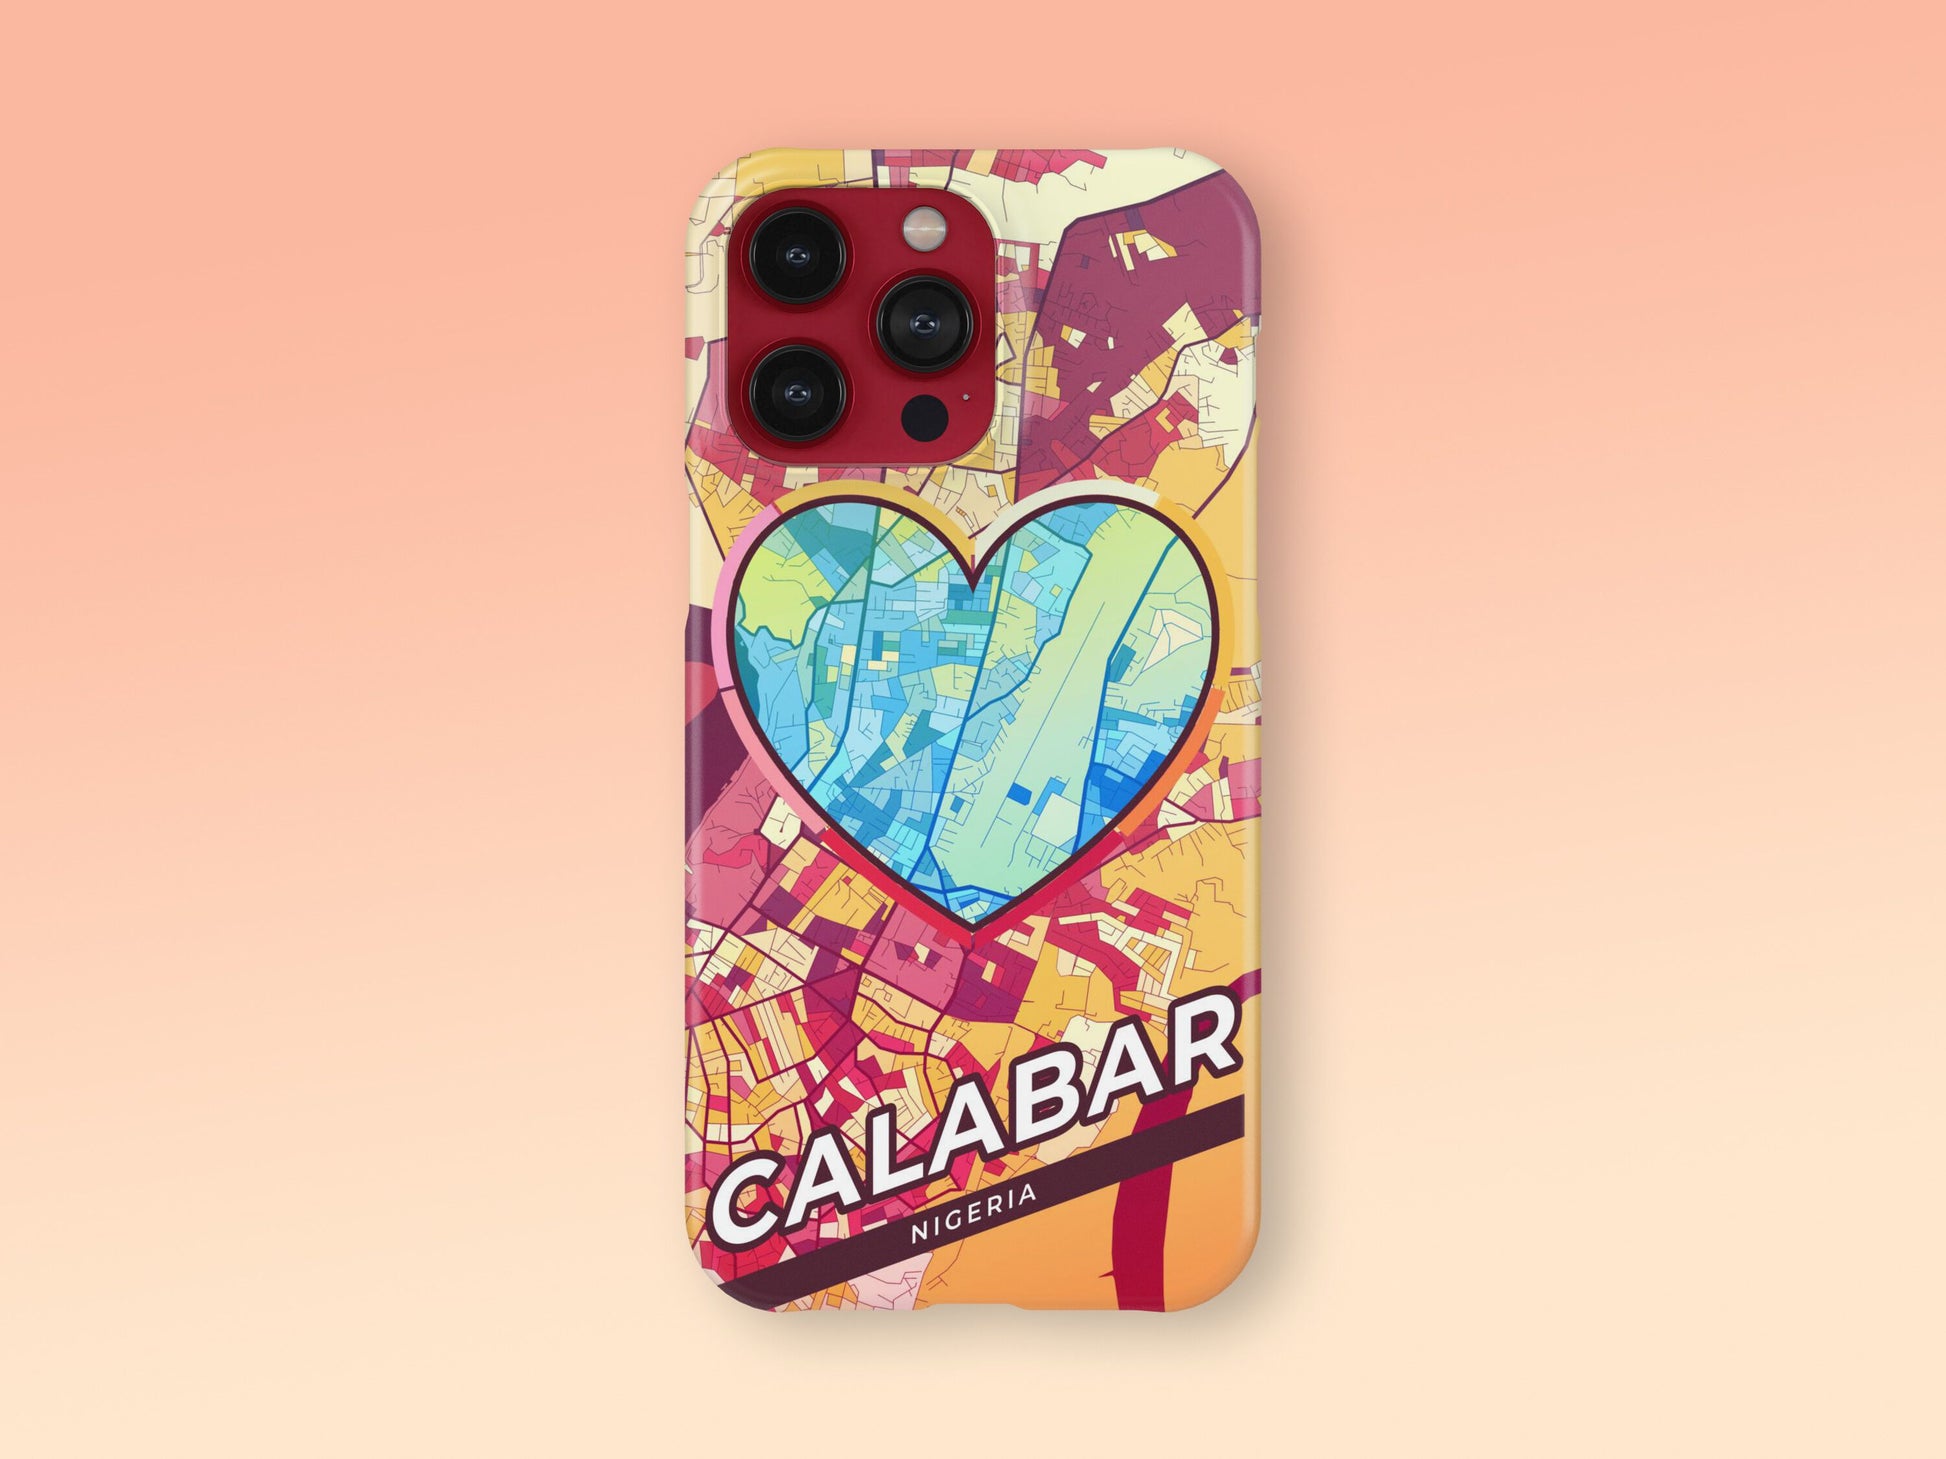 Calabar Nigeria slim phone case with colorful icon. Birthday, wedding or housewarming gift. Couple match cases. 2